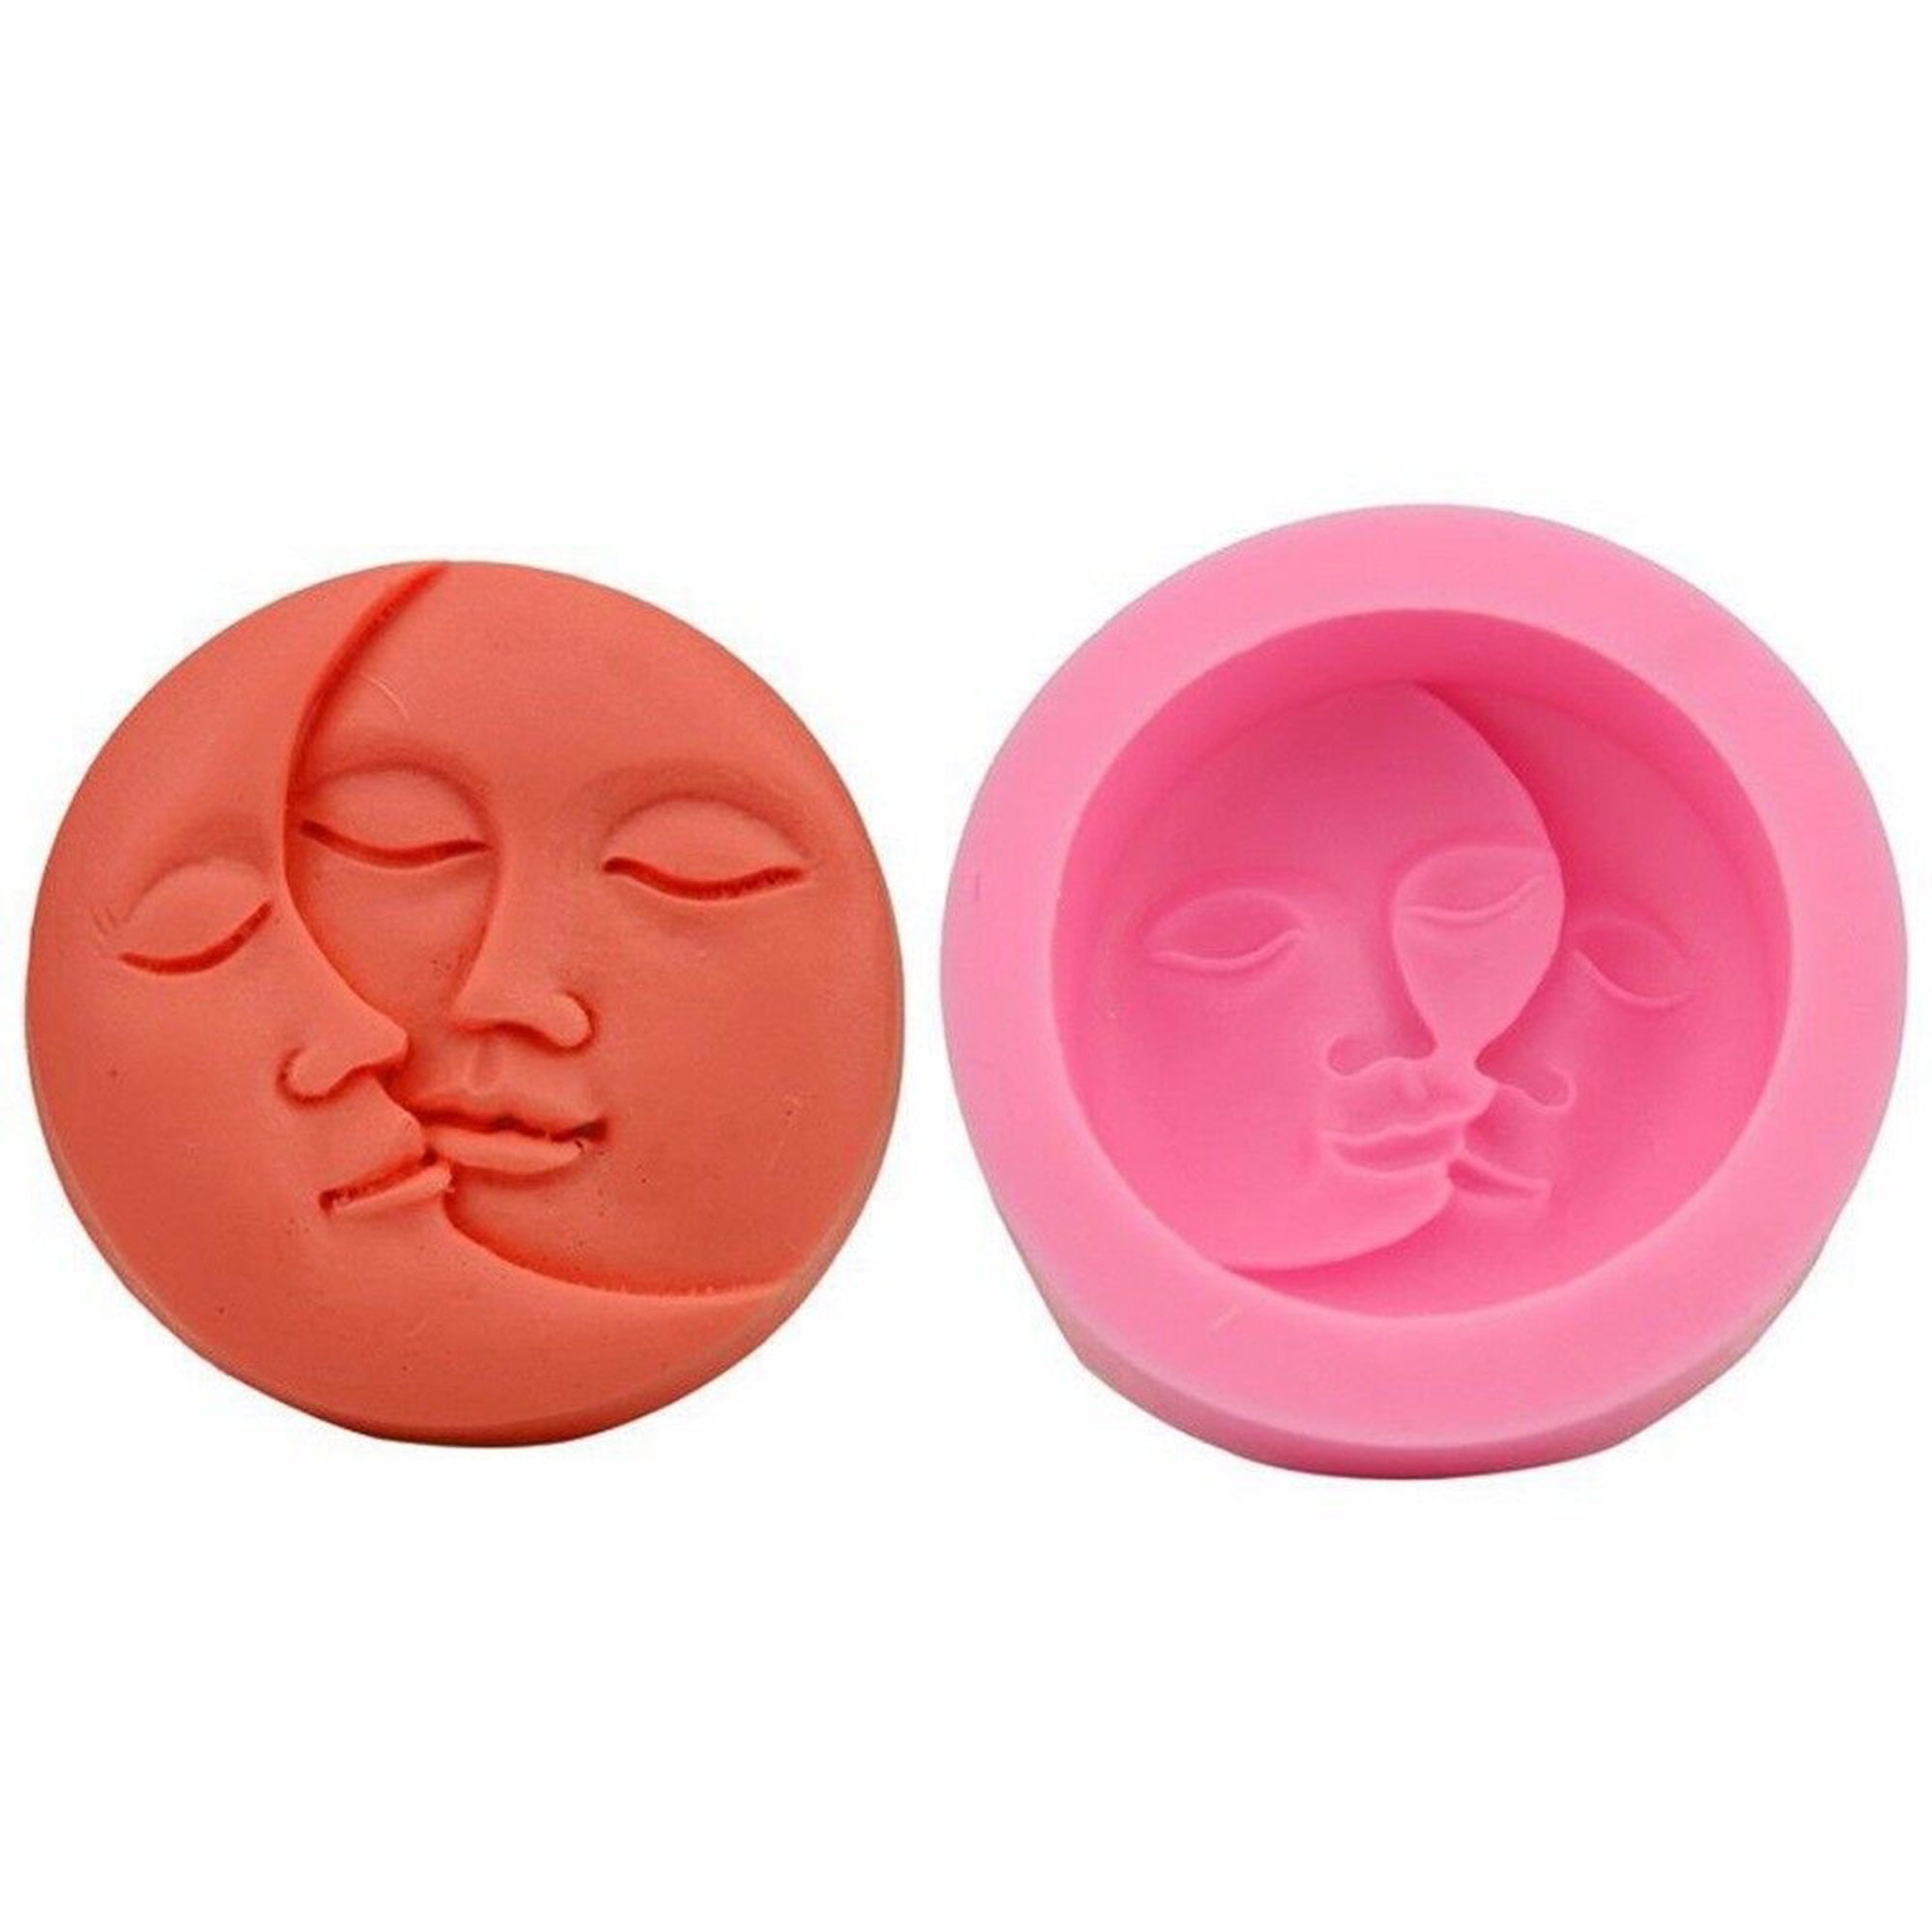 Details about   Sun and Moon Face Shape Silicone Mold Fondant Chocolate Soap Cake Decor Tools 